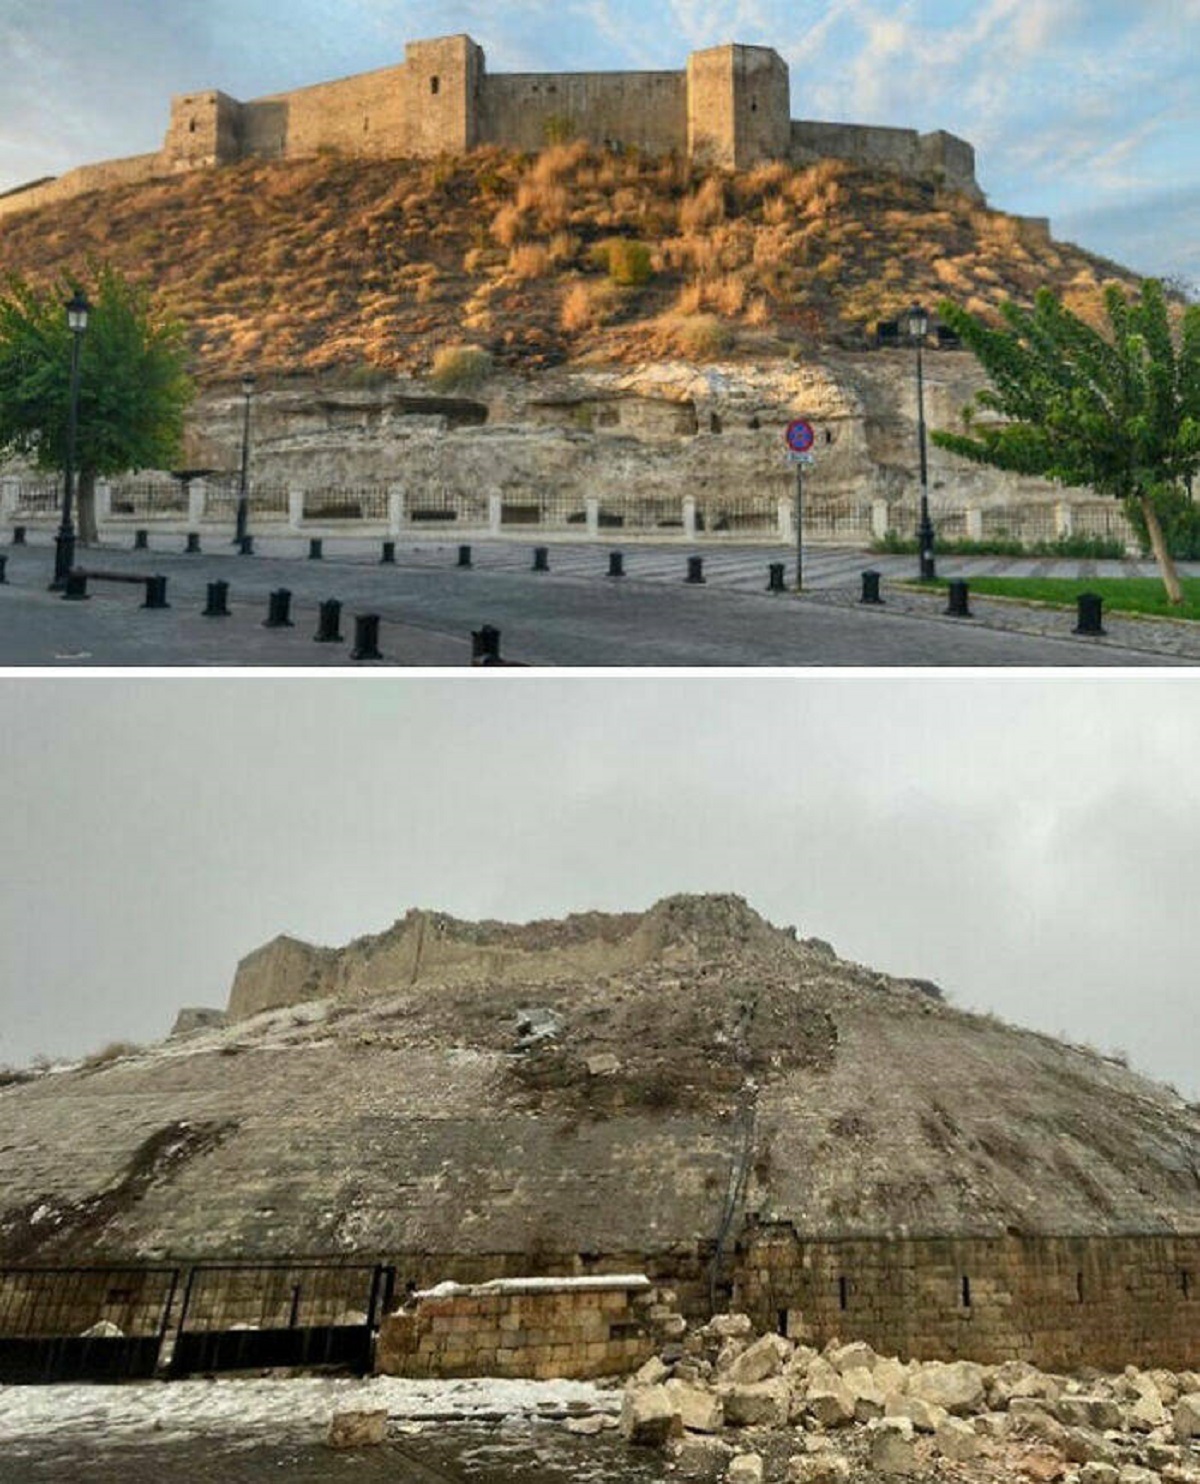 "The Cultural As Well As Human Cost Of A 7.8 Magnitude Earthquake; Gaziantep Castle, Turkey, At The Start Of The Month vs. The End"